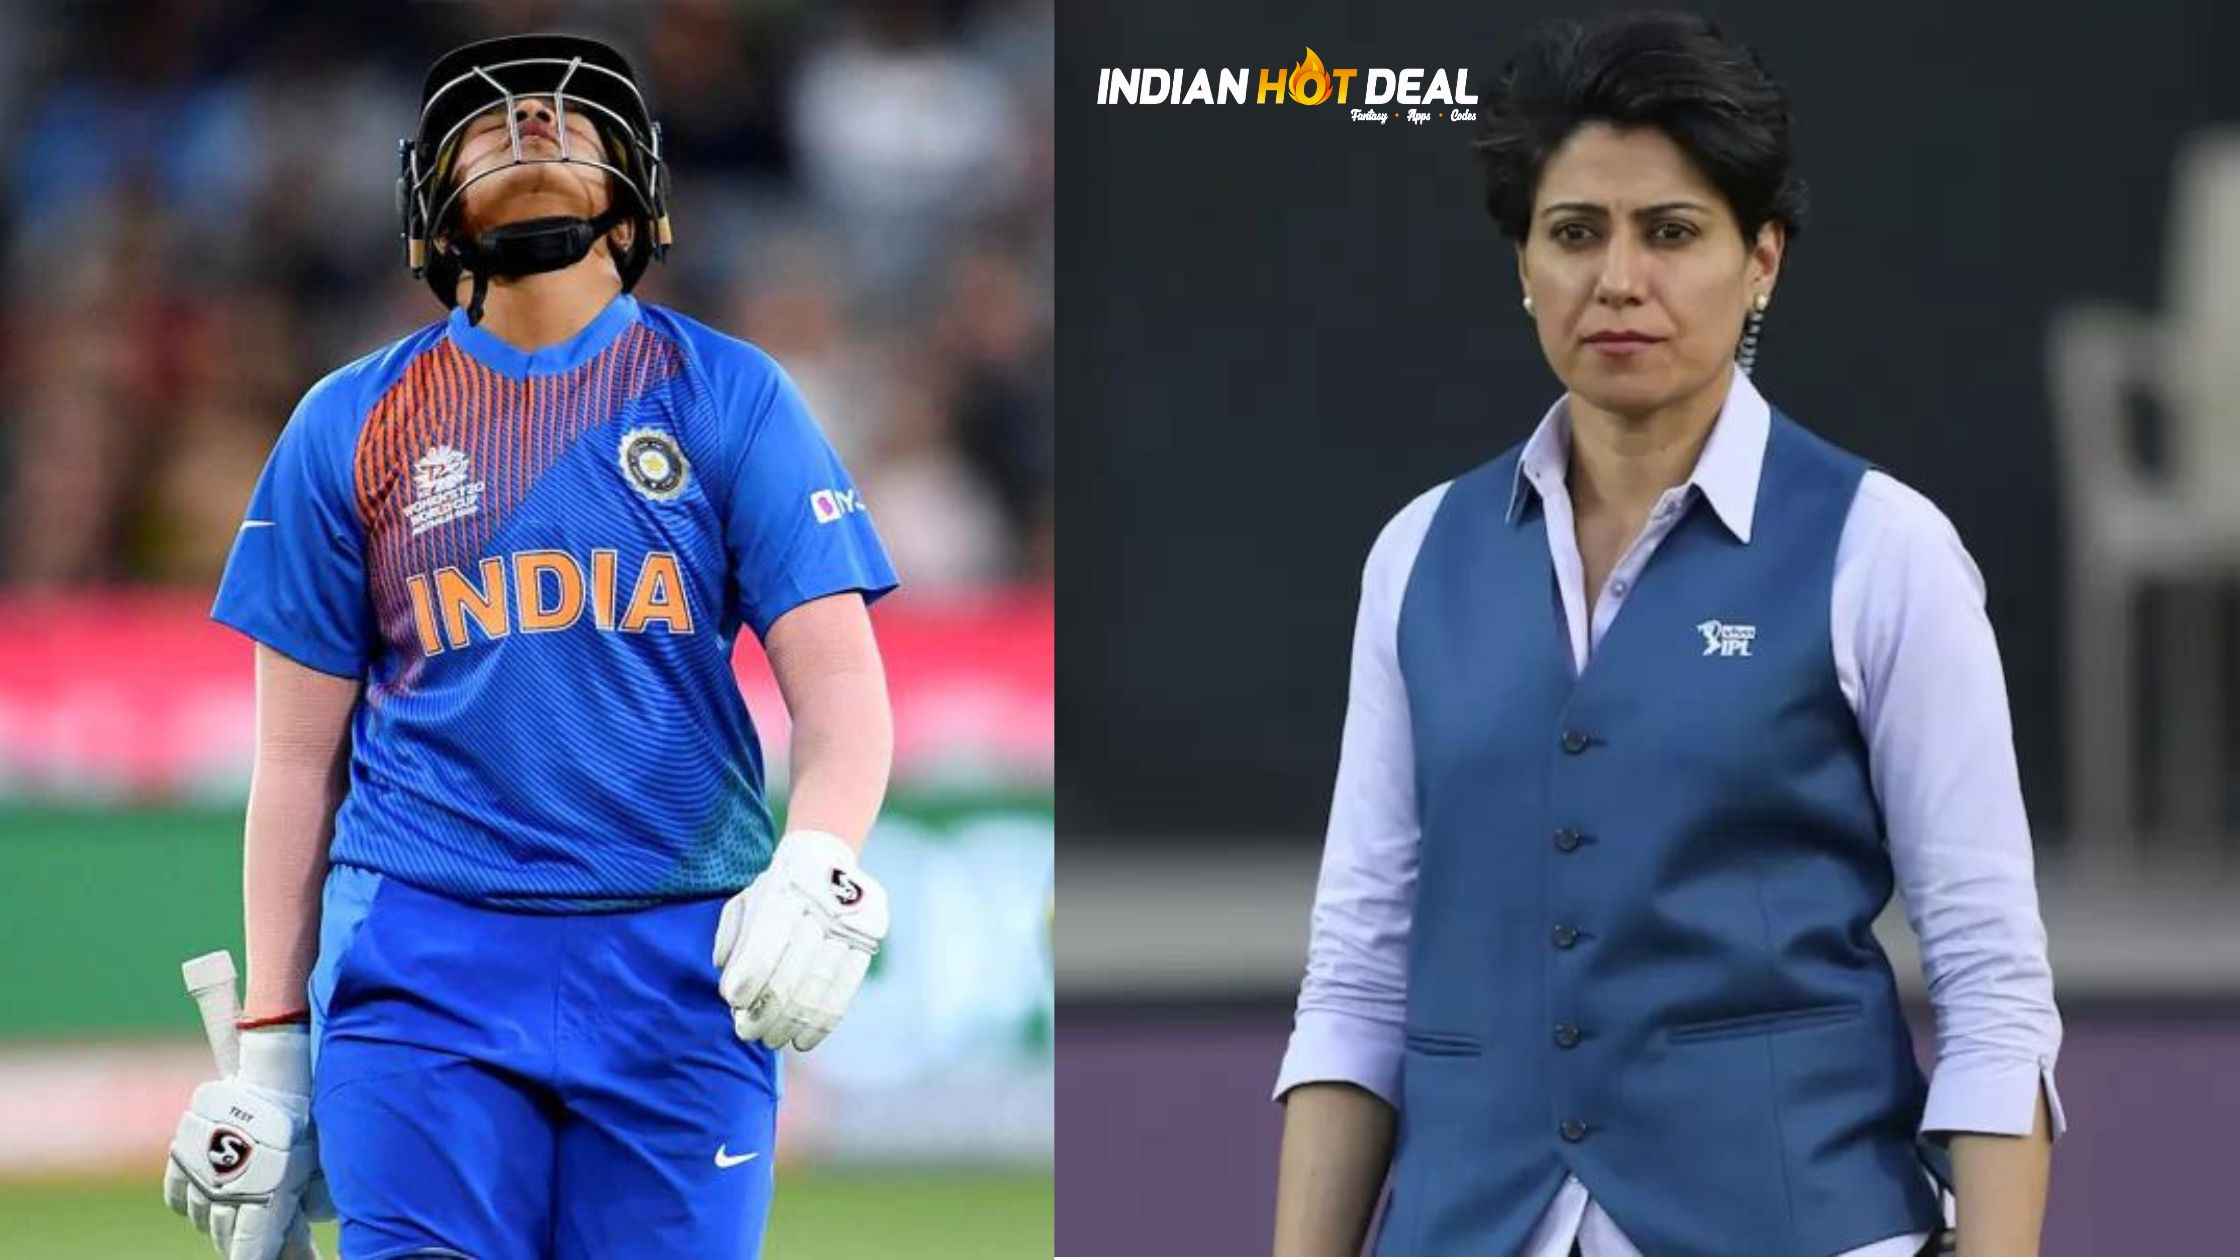 "It means you have not worked on yourself": Anjum Chopra criticizes Shefali Verma after her dismissal against Bangladesh